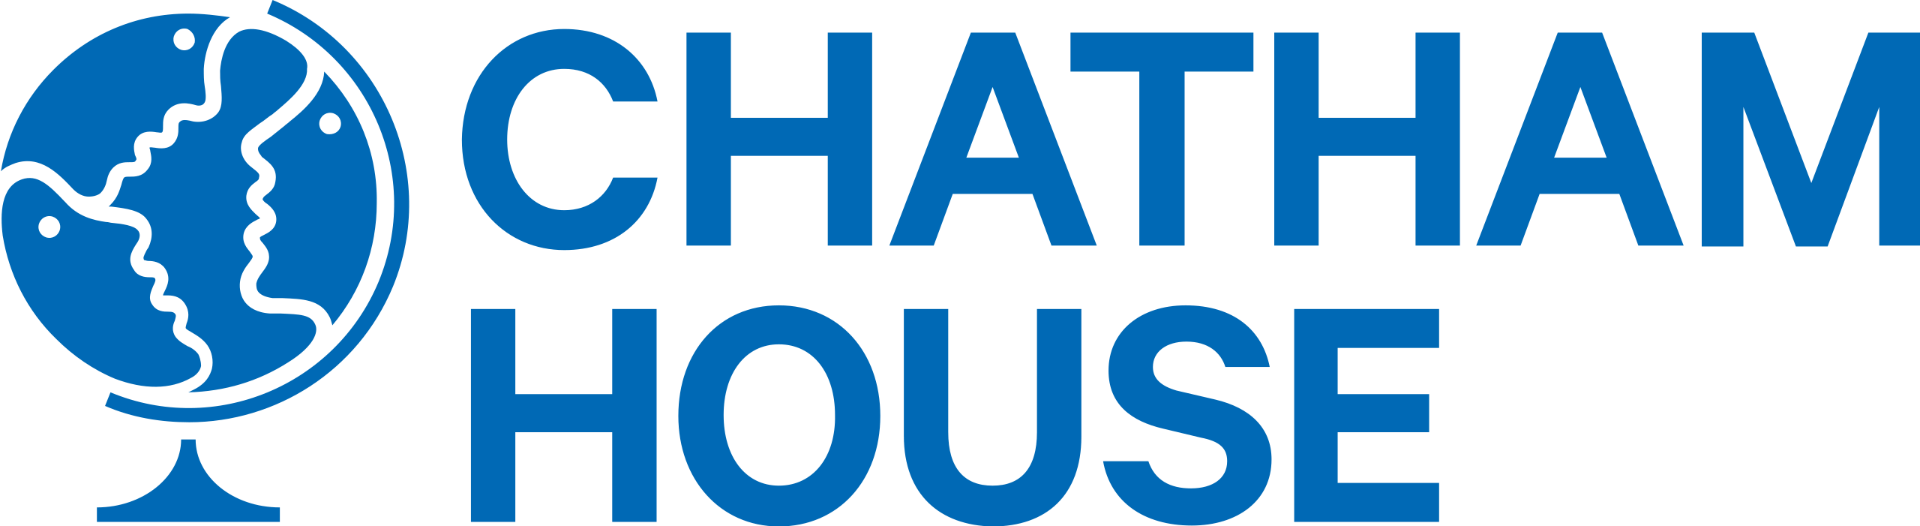 Chatham_House_Royal_Institute_of_International_Affairs.svg